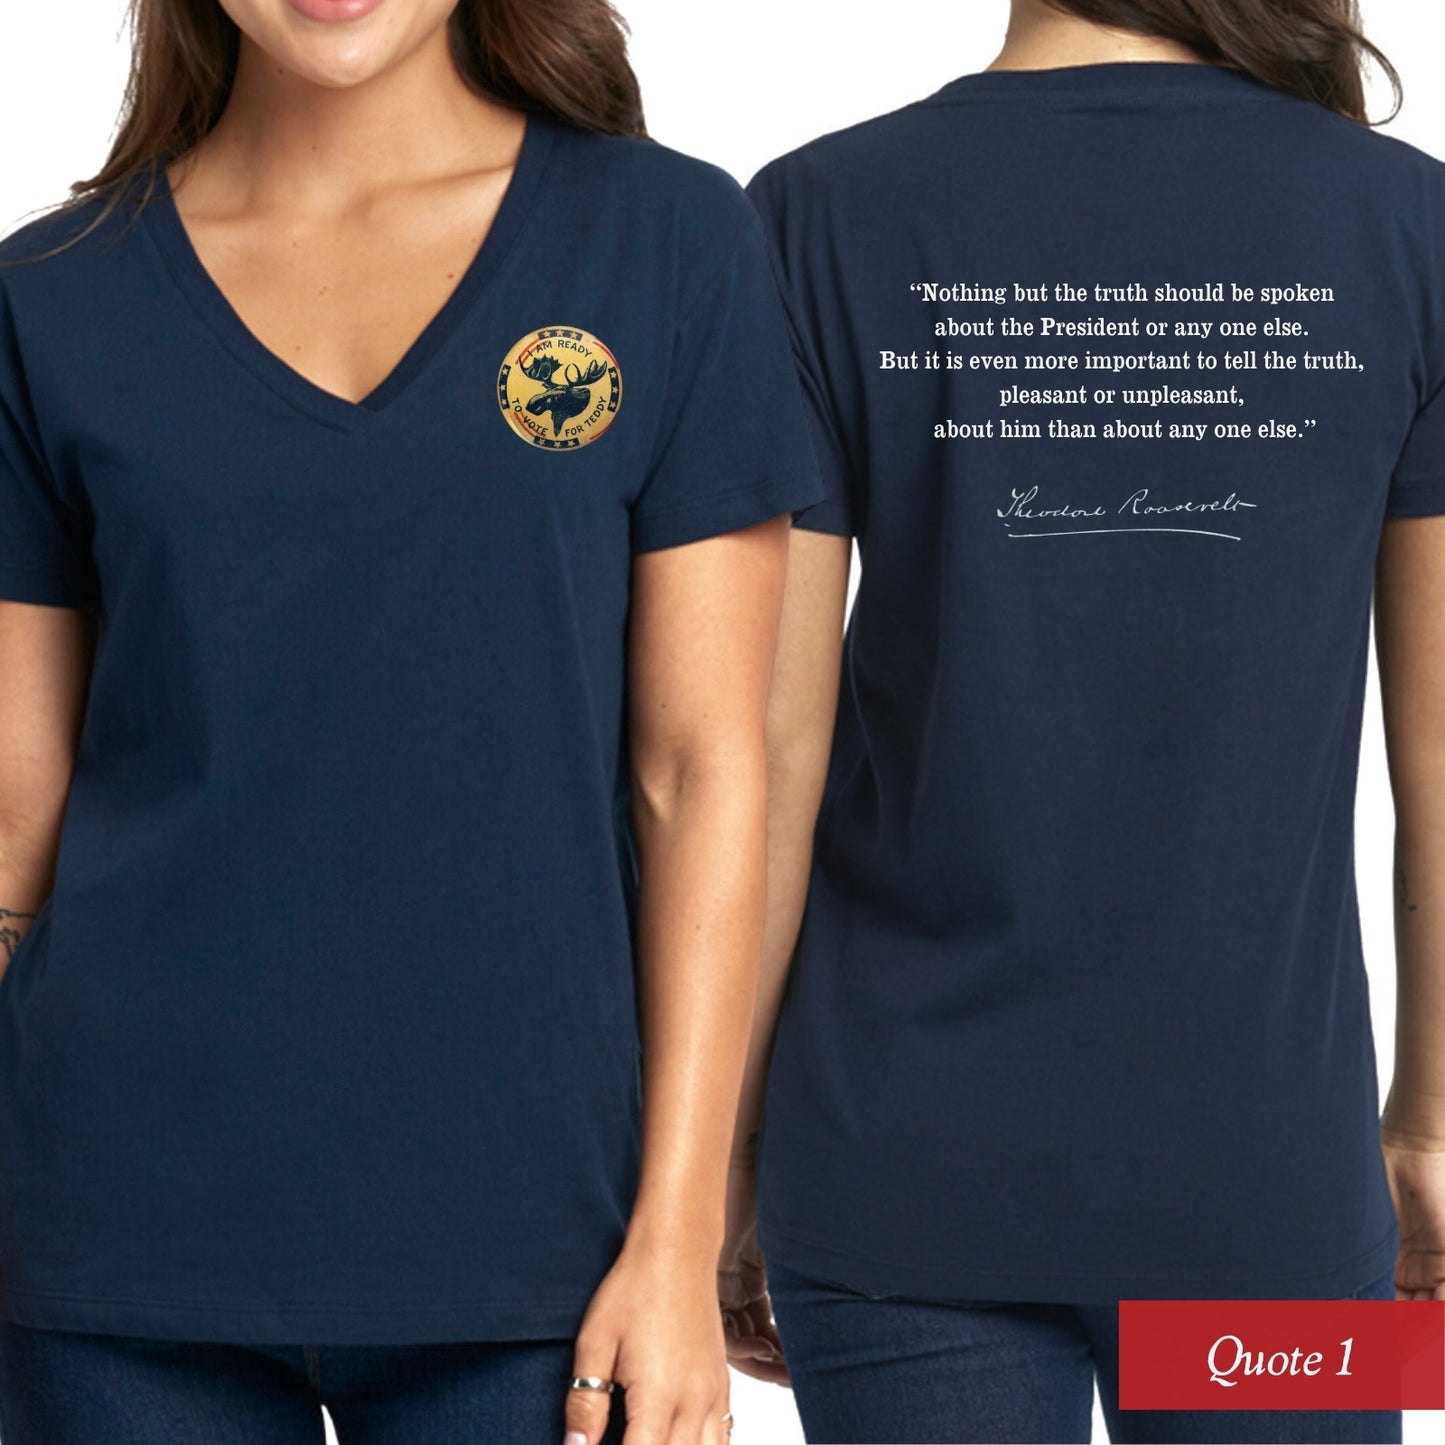 Quote 1 of the Teddy Roosevelt “I’m ready to vote for Teddy” presidential campaign Women's v-neck shirt from The History List store